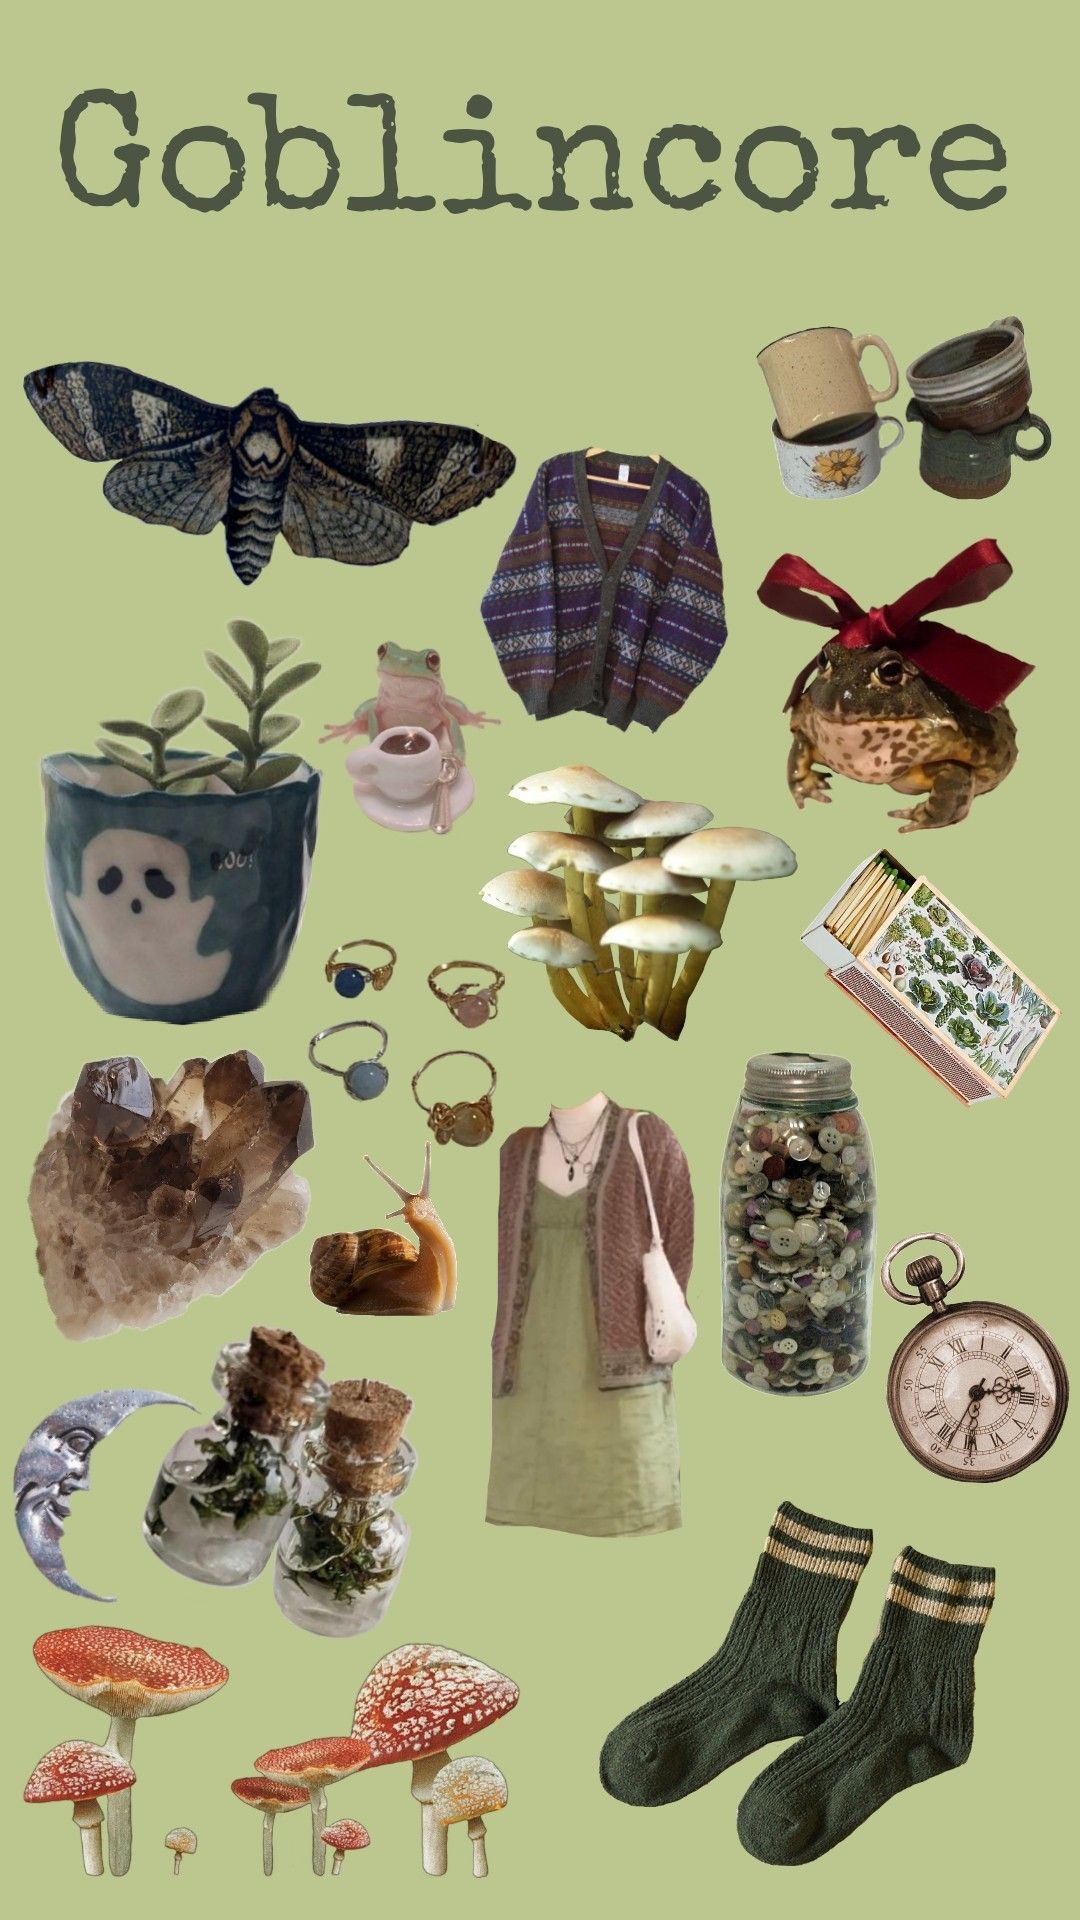 A collage of items including mushrooms, a cup, a butterfly, and a book. - Goblincore